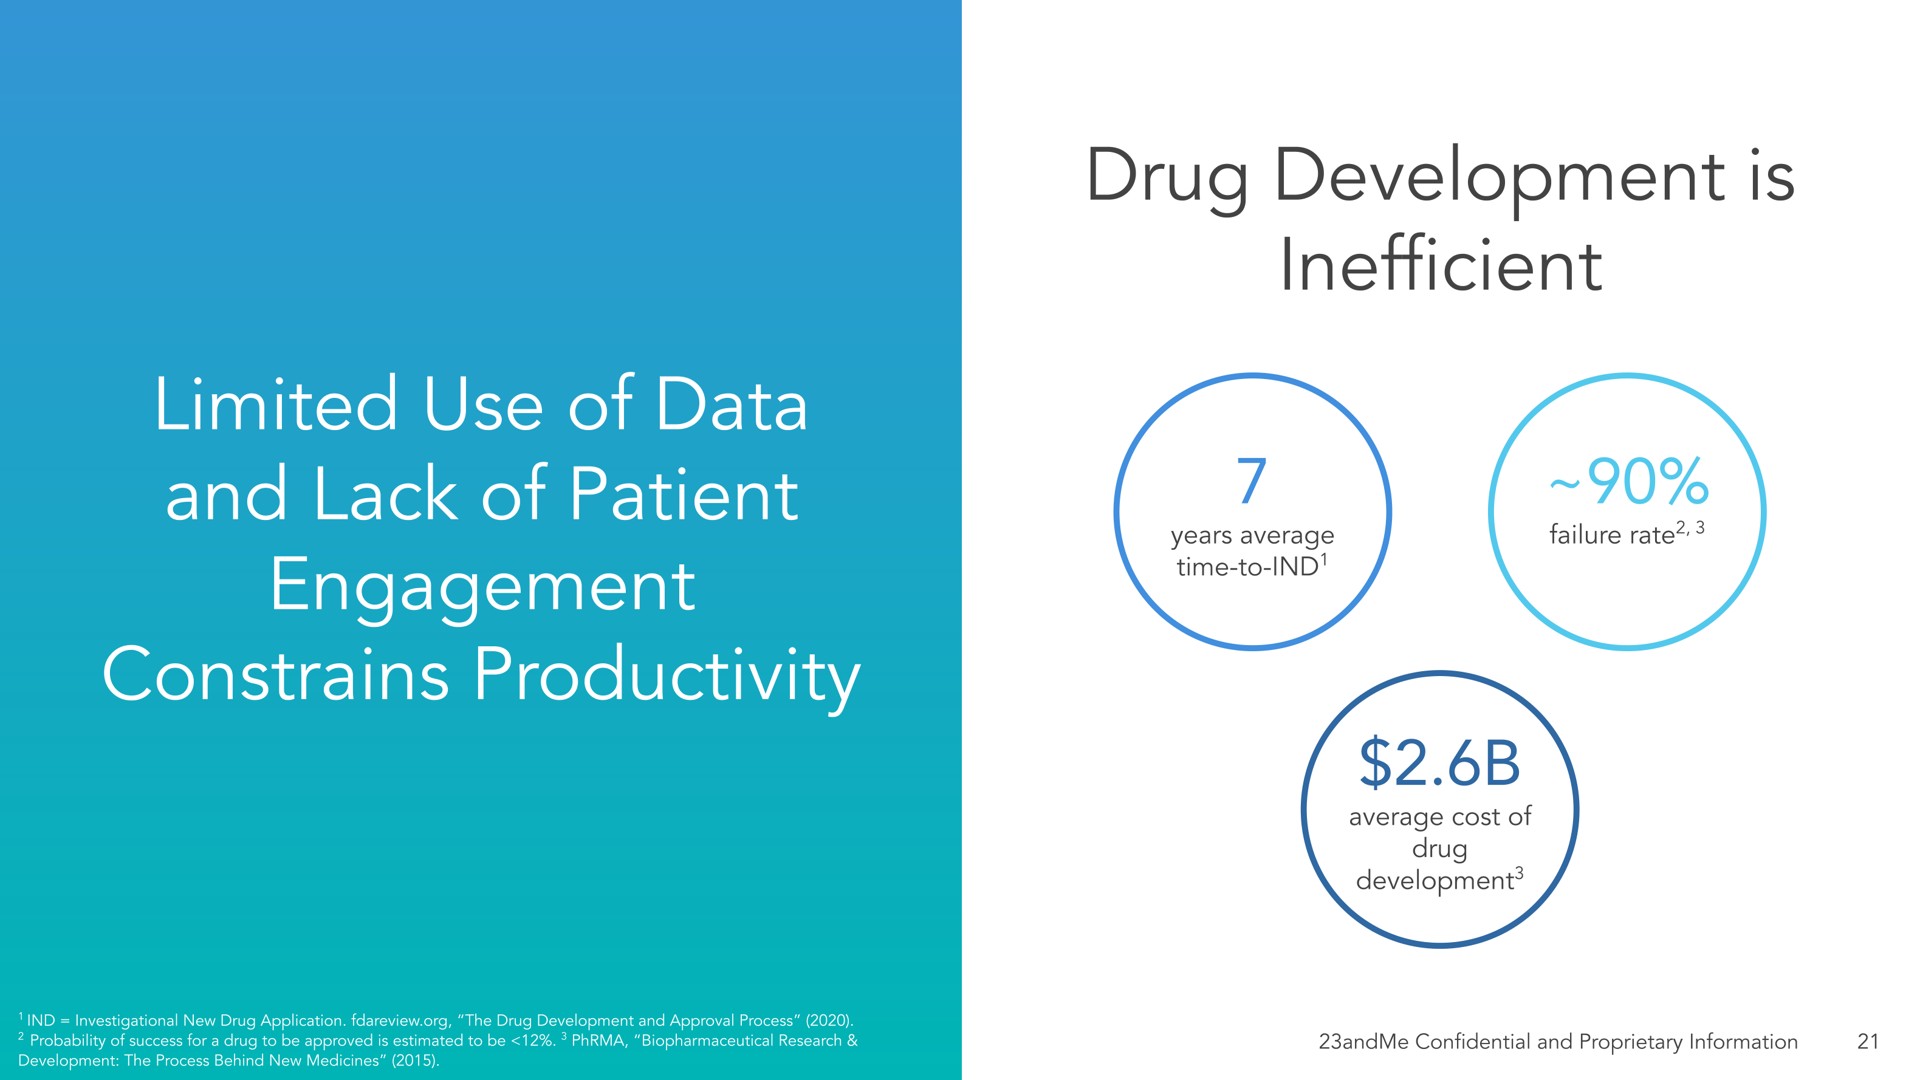 limited use of data and lack of patient engagement constrains productivity drug development is inefficient | 23andMe